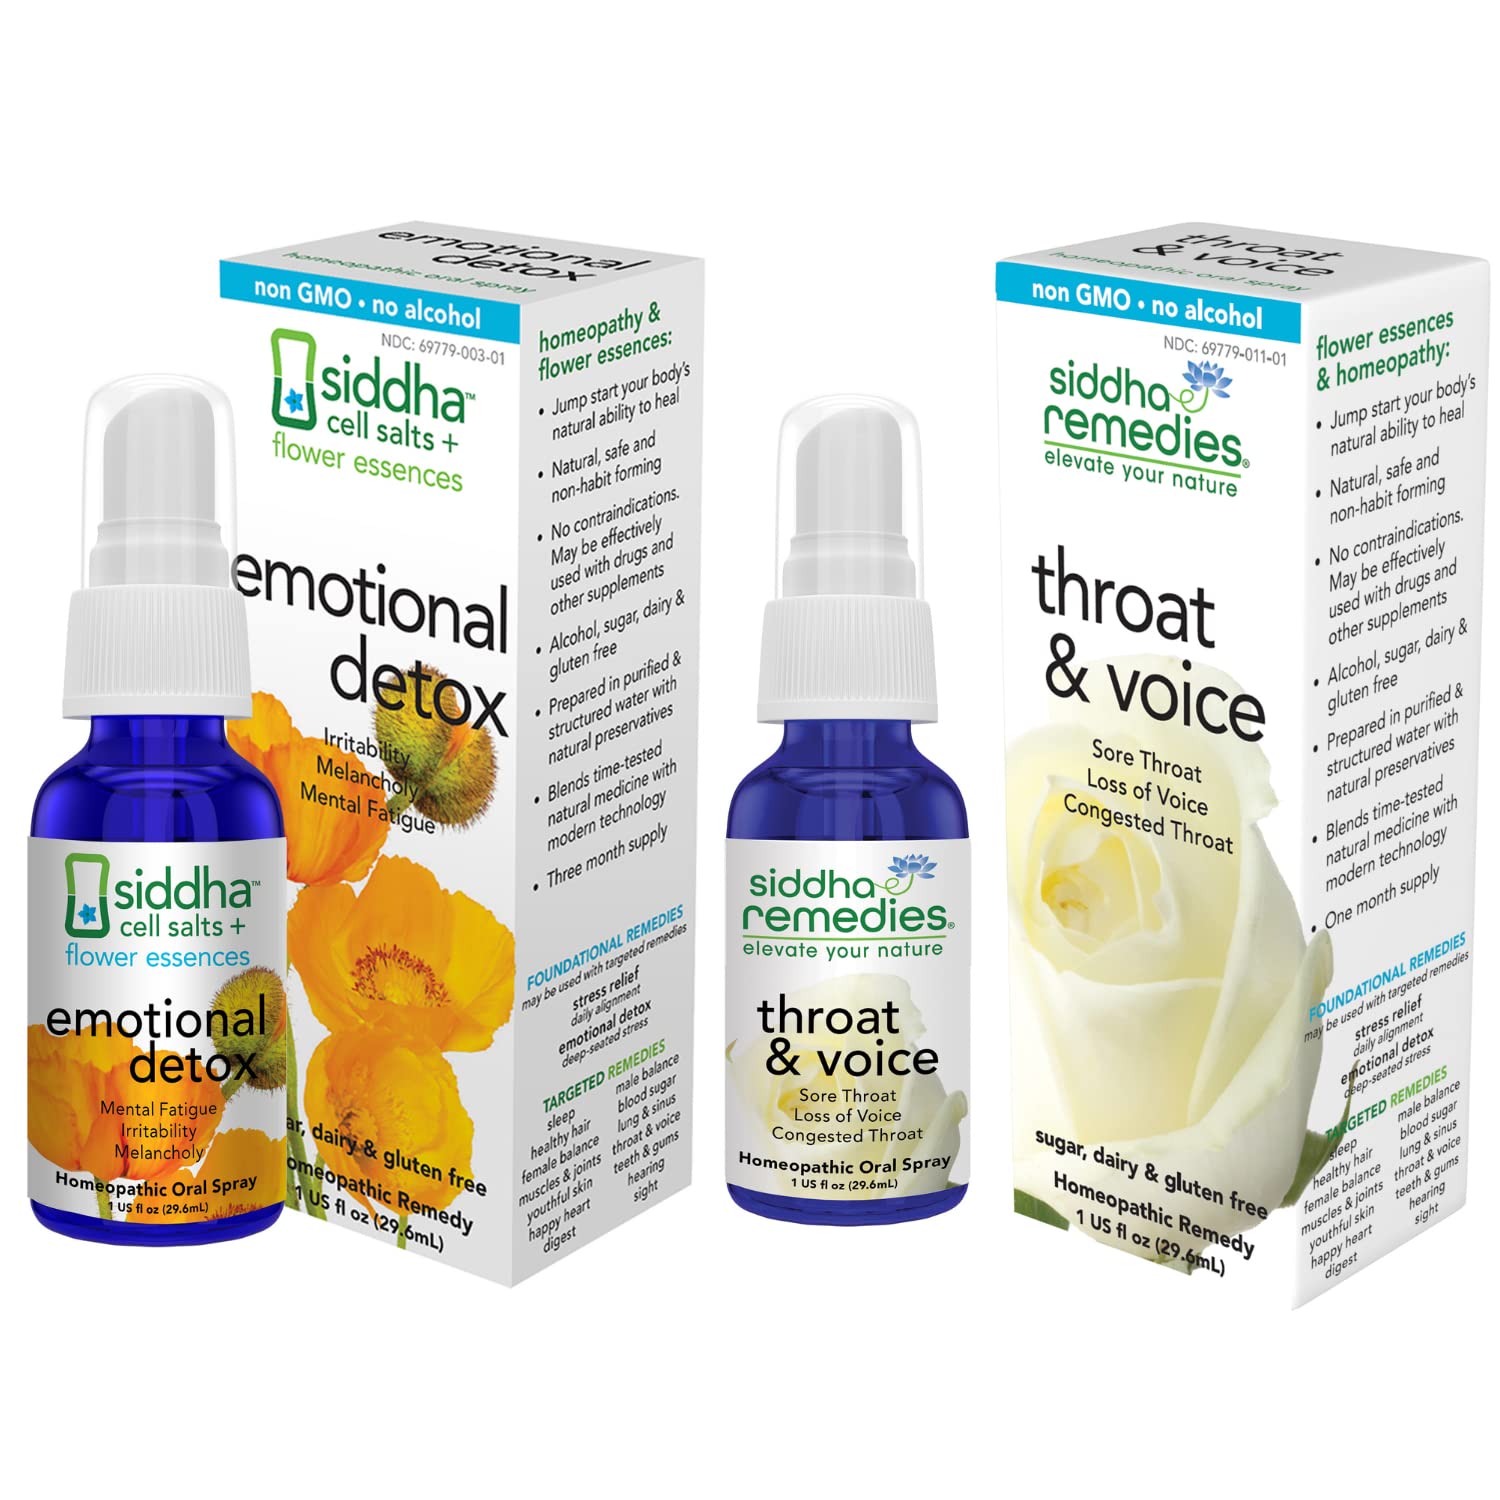 Siddha Remedies Emotional Detox and Throat & Voice Homeopathic Oral Spray for Sore, Strained Throat